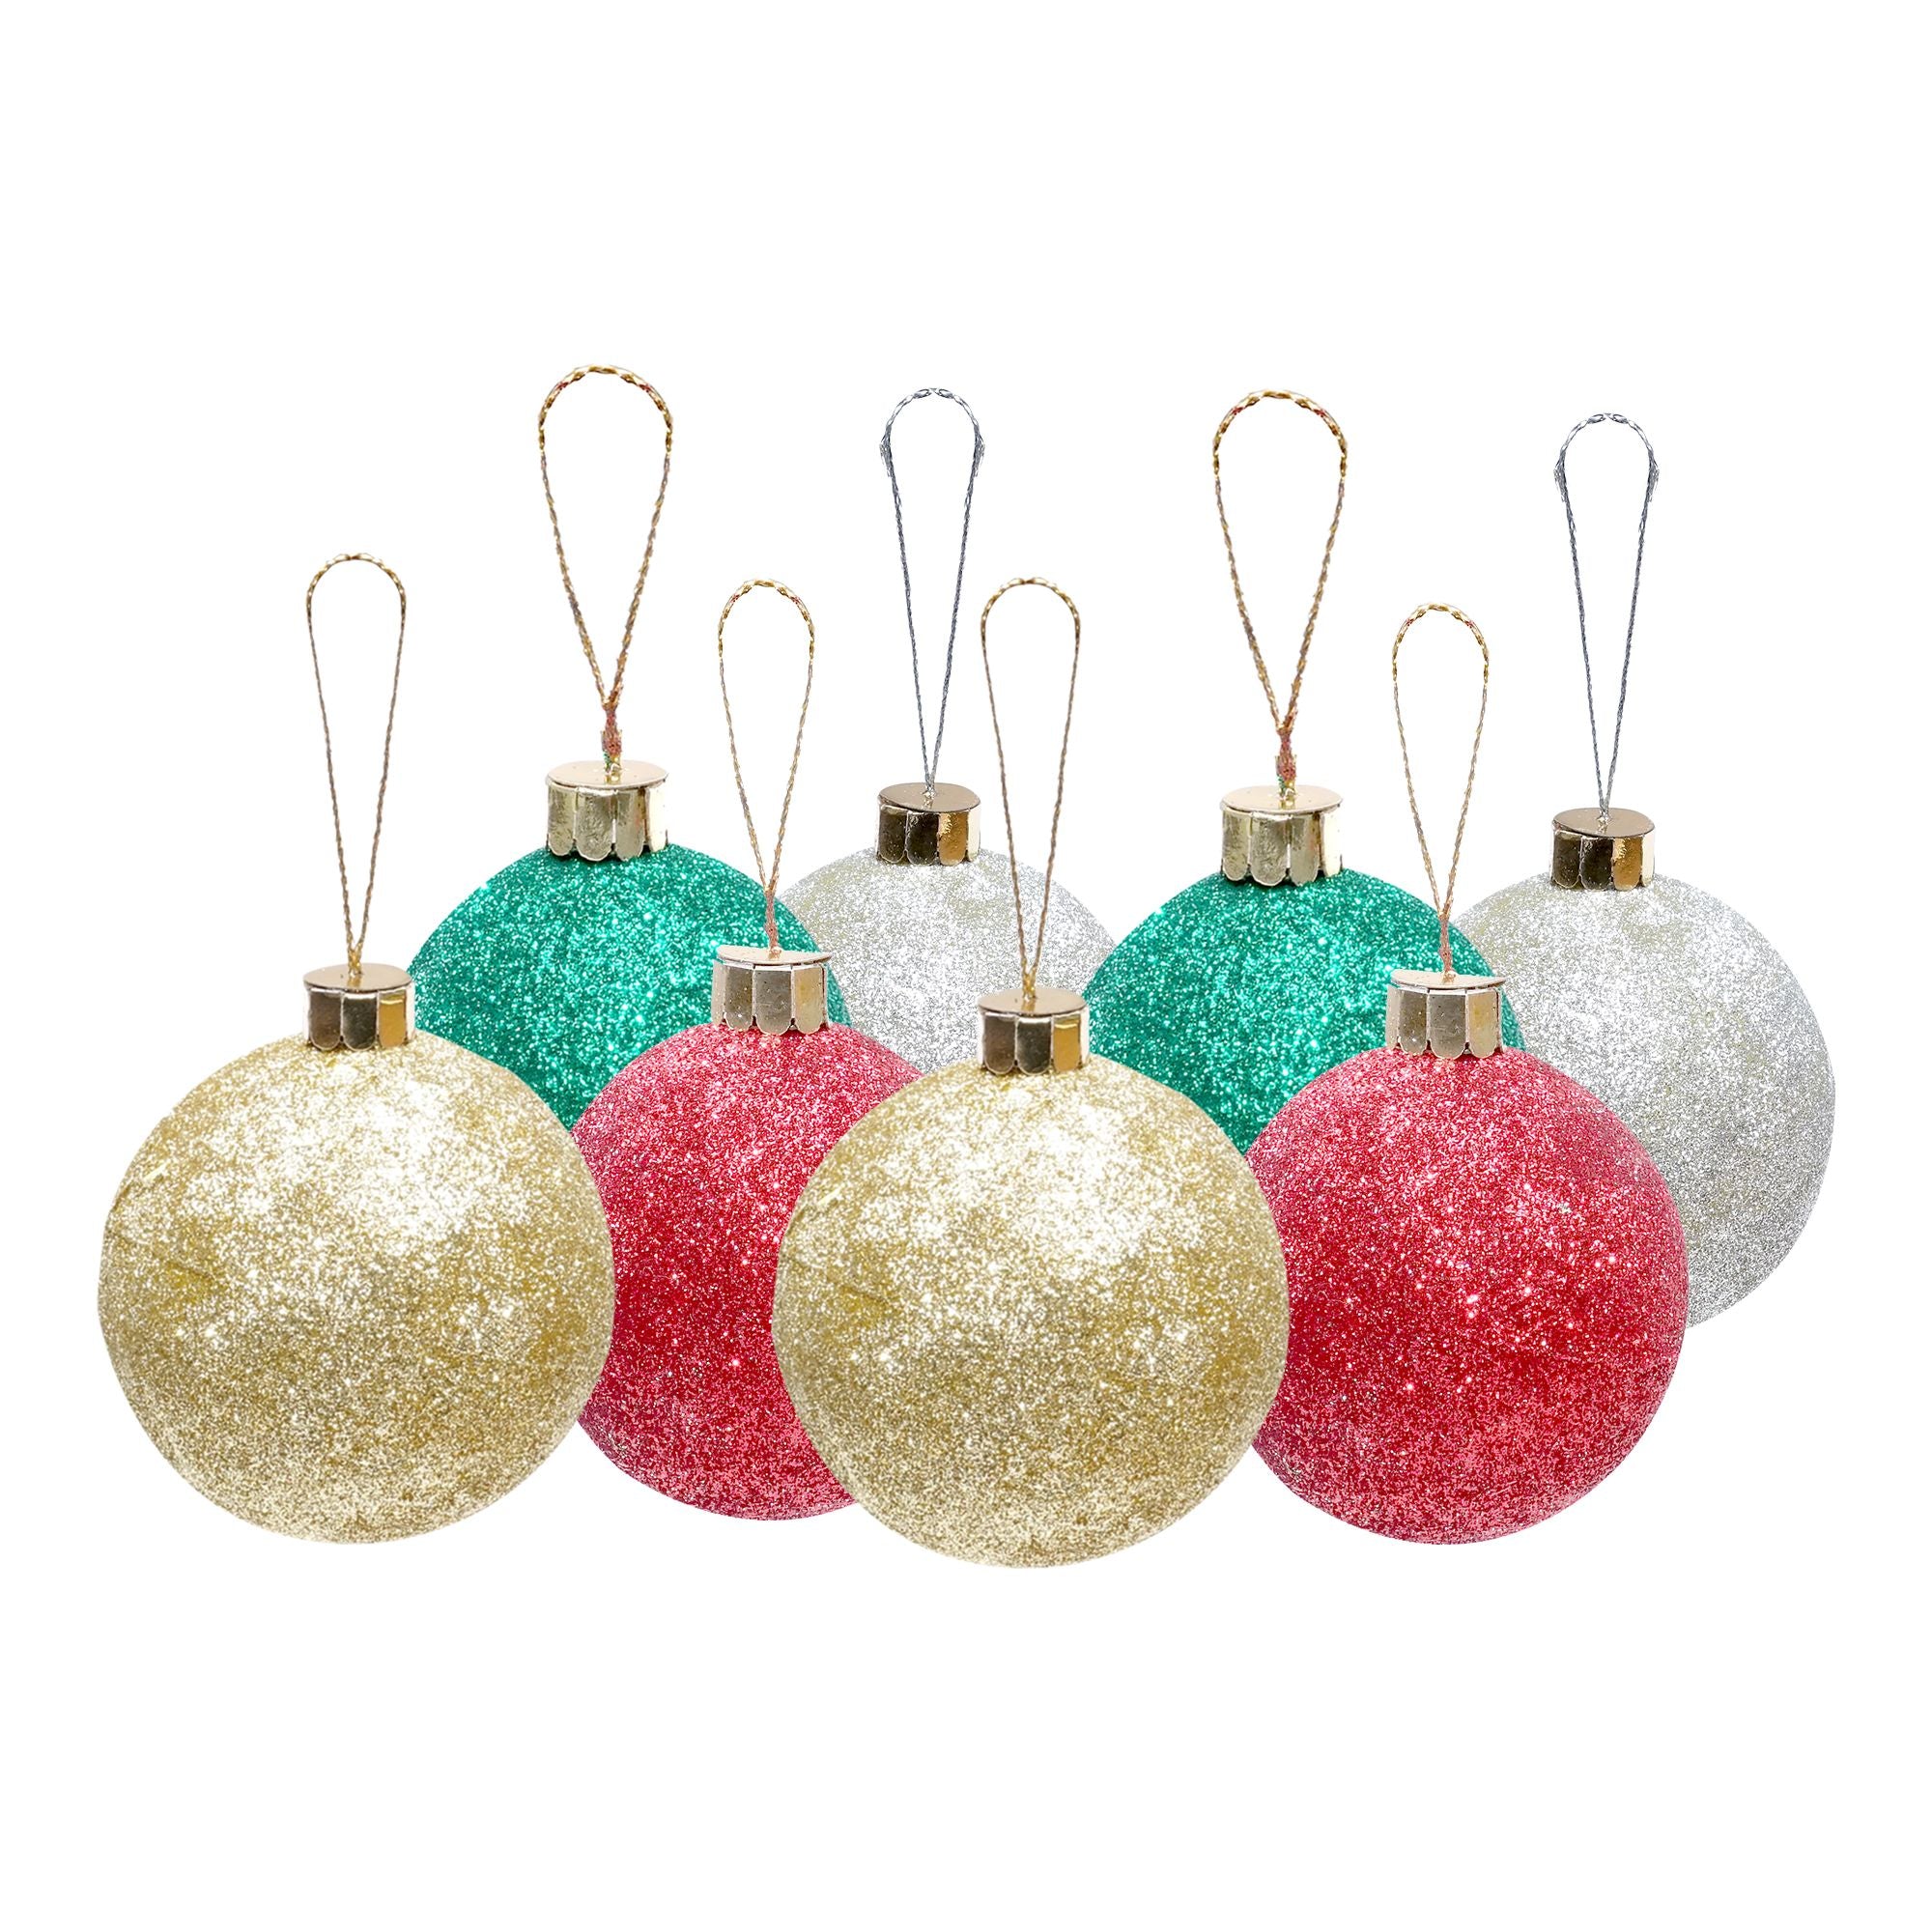 Handmade Christmas Ornaments - Glitter Baubles, 50mm, Assorted Colours - Gold, Red, Green, Silver, 8pc